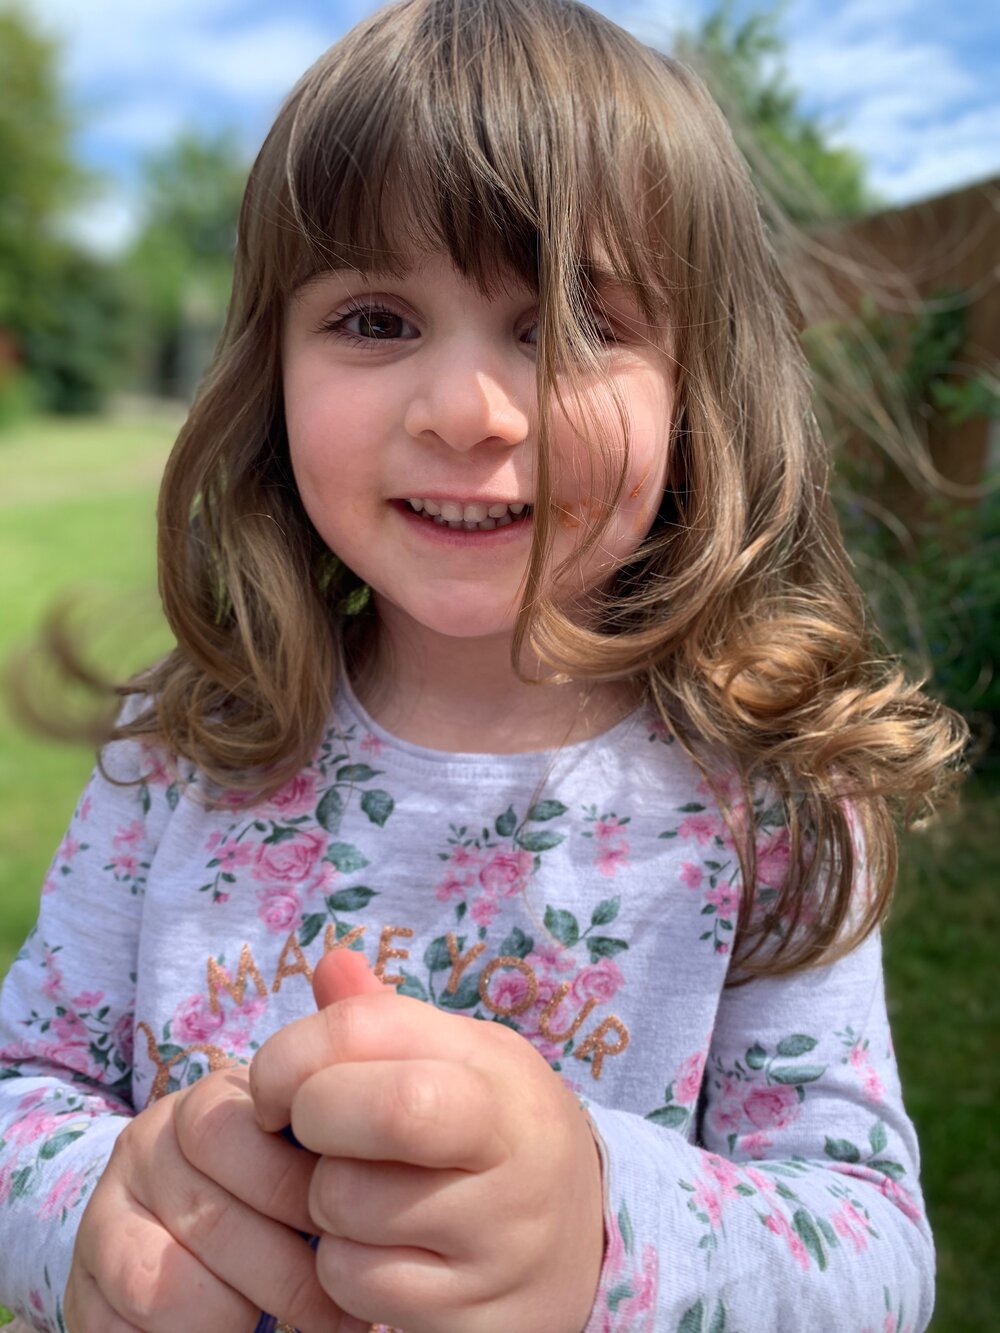 Millie smiling at the camera whilst playing in the garden, aged 3.5. Photo: Lacuna Voices.